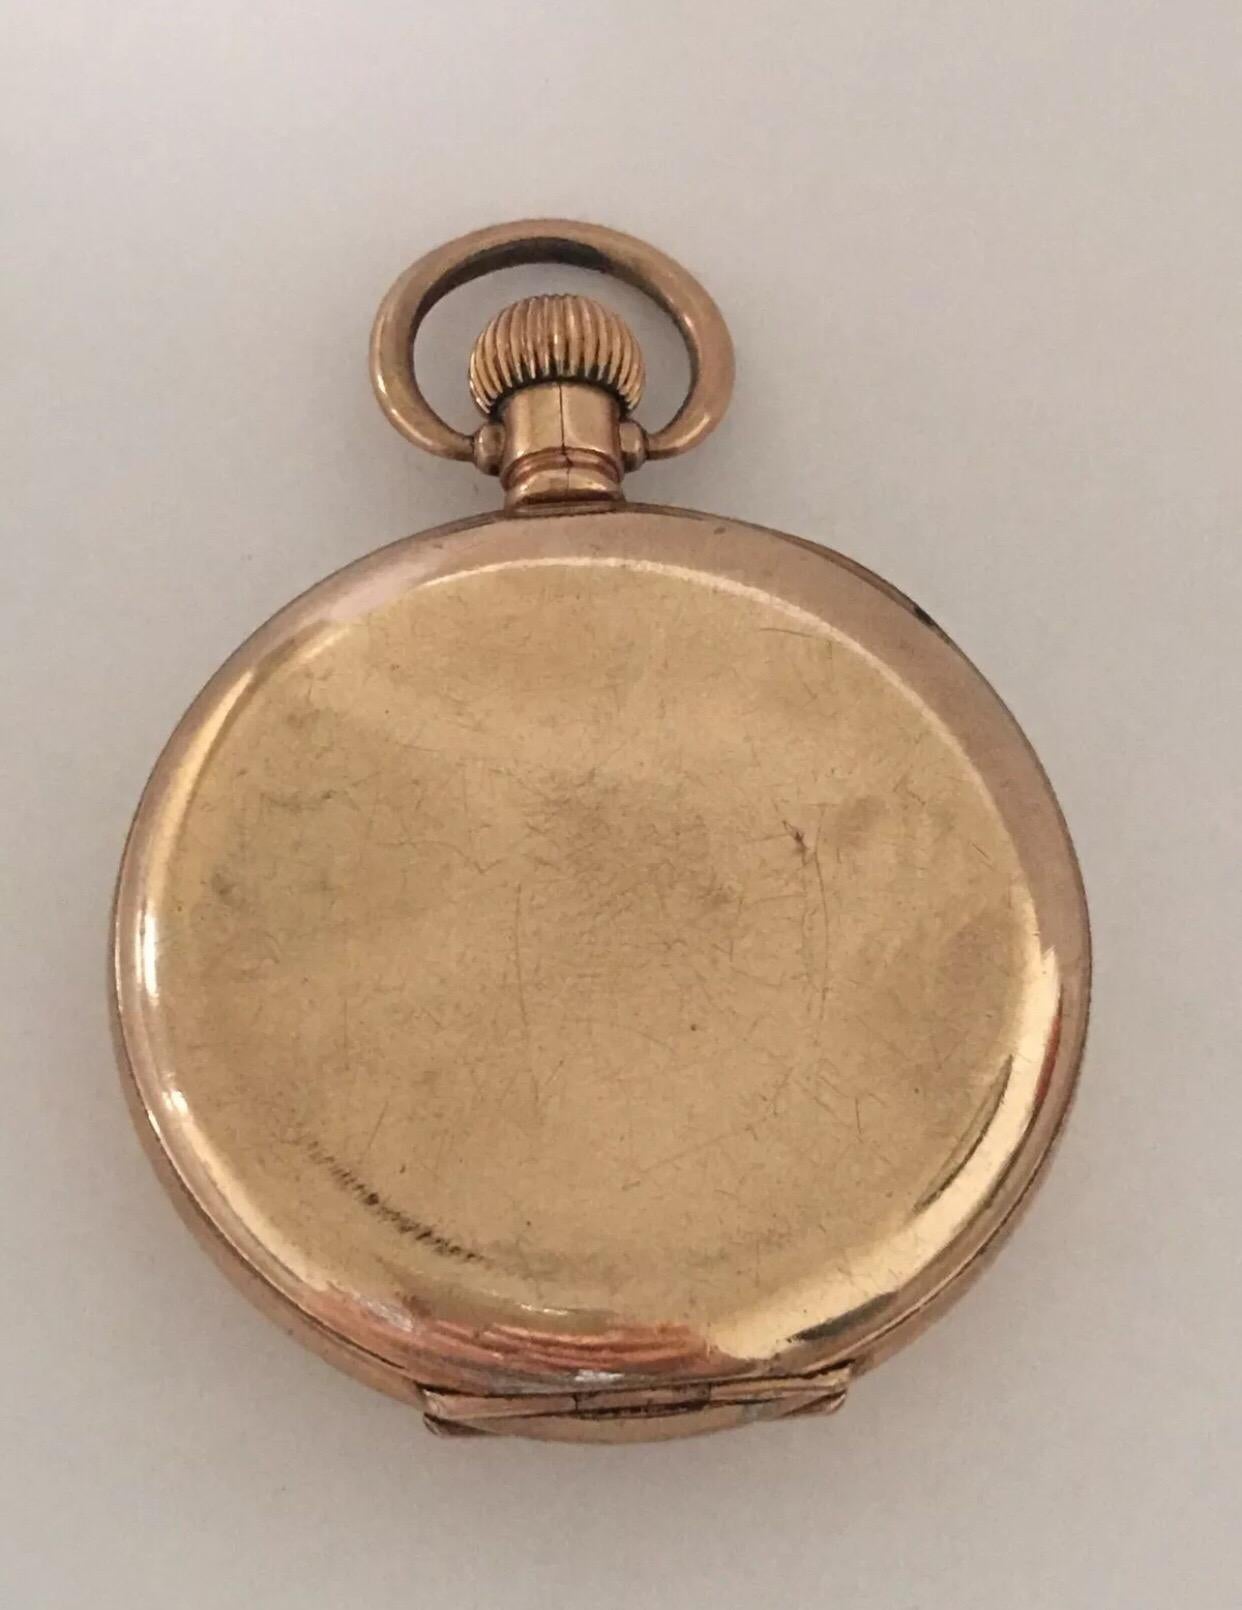 Antique Gold Plated Half Hunter Dennison case Pocket Watch.

This beautiful 52mm diameter keyless gold plated pocket watch is in good working condition and is running well. Visible signs of ageing and wear with light surface marks on the glass and